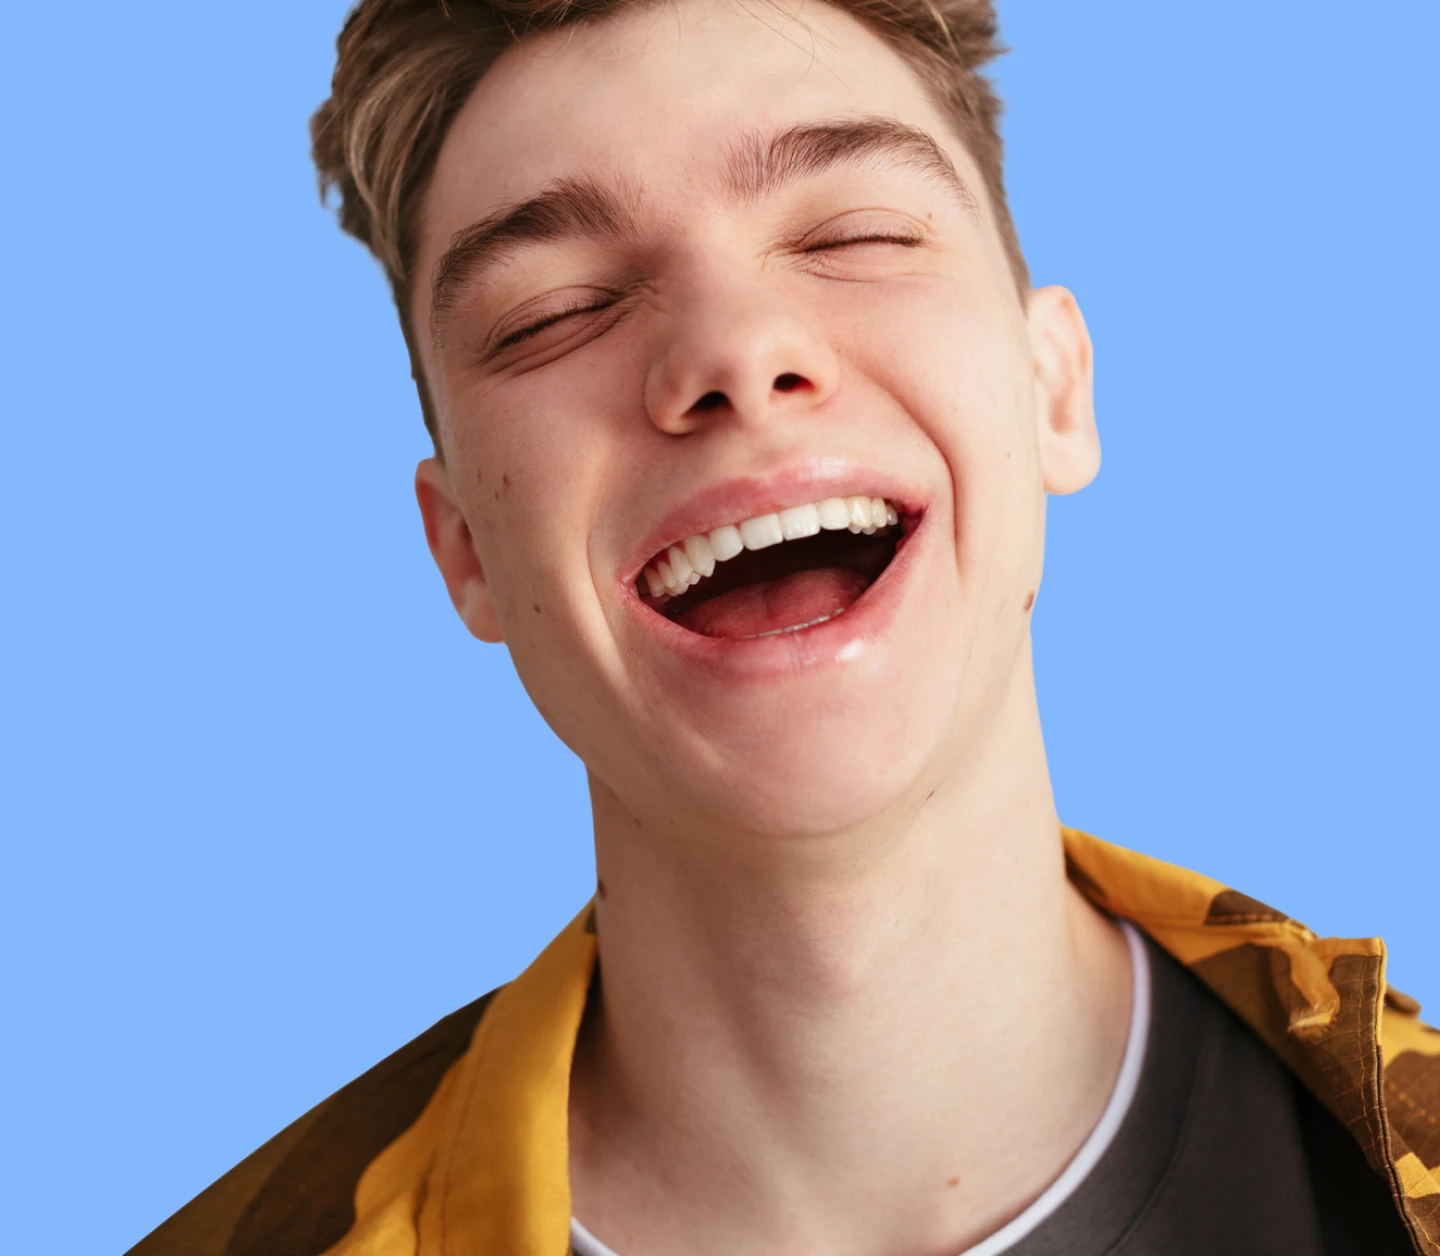 Teenage boy laughing with eyes closed